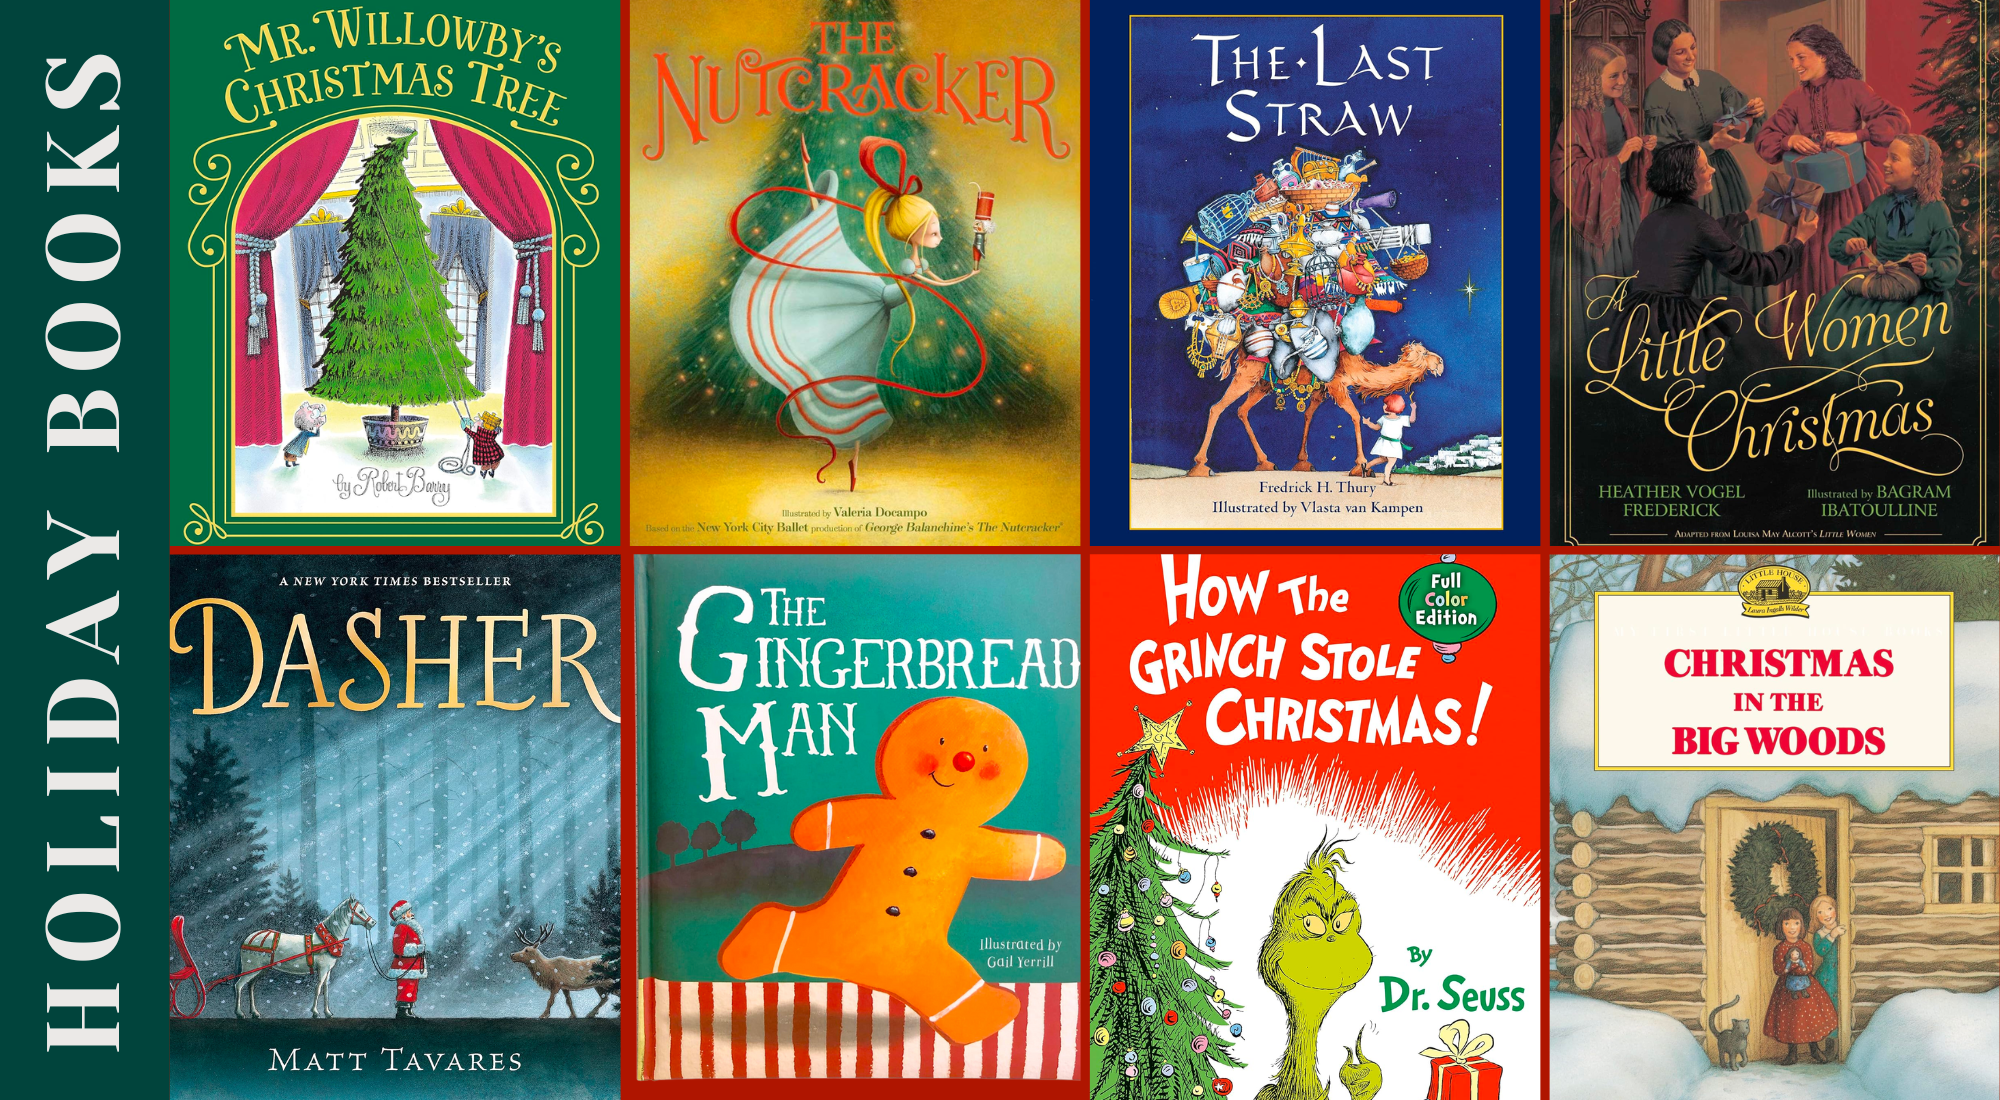 THE BEST Holiday Reading List for Kids & Families